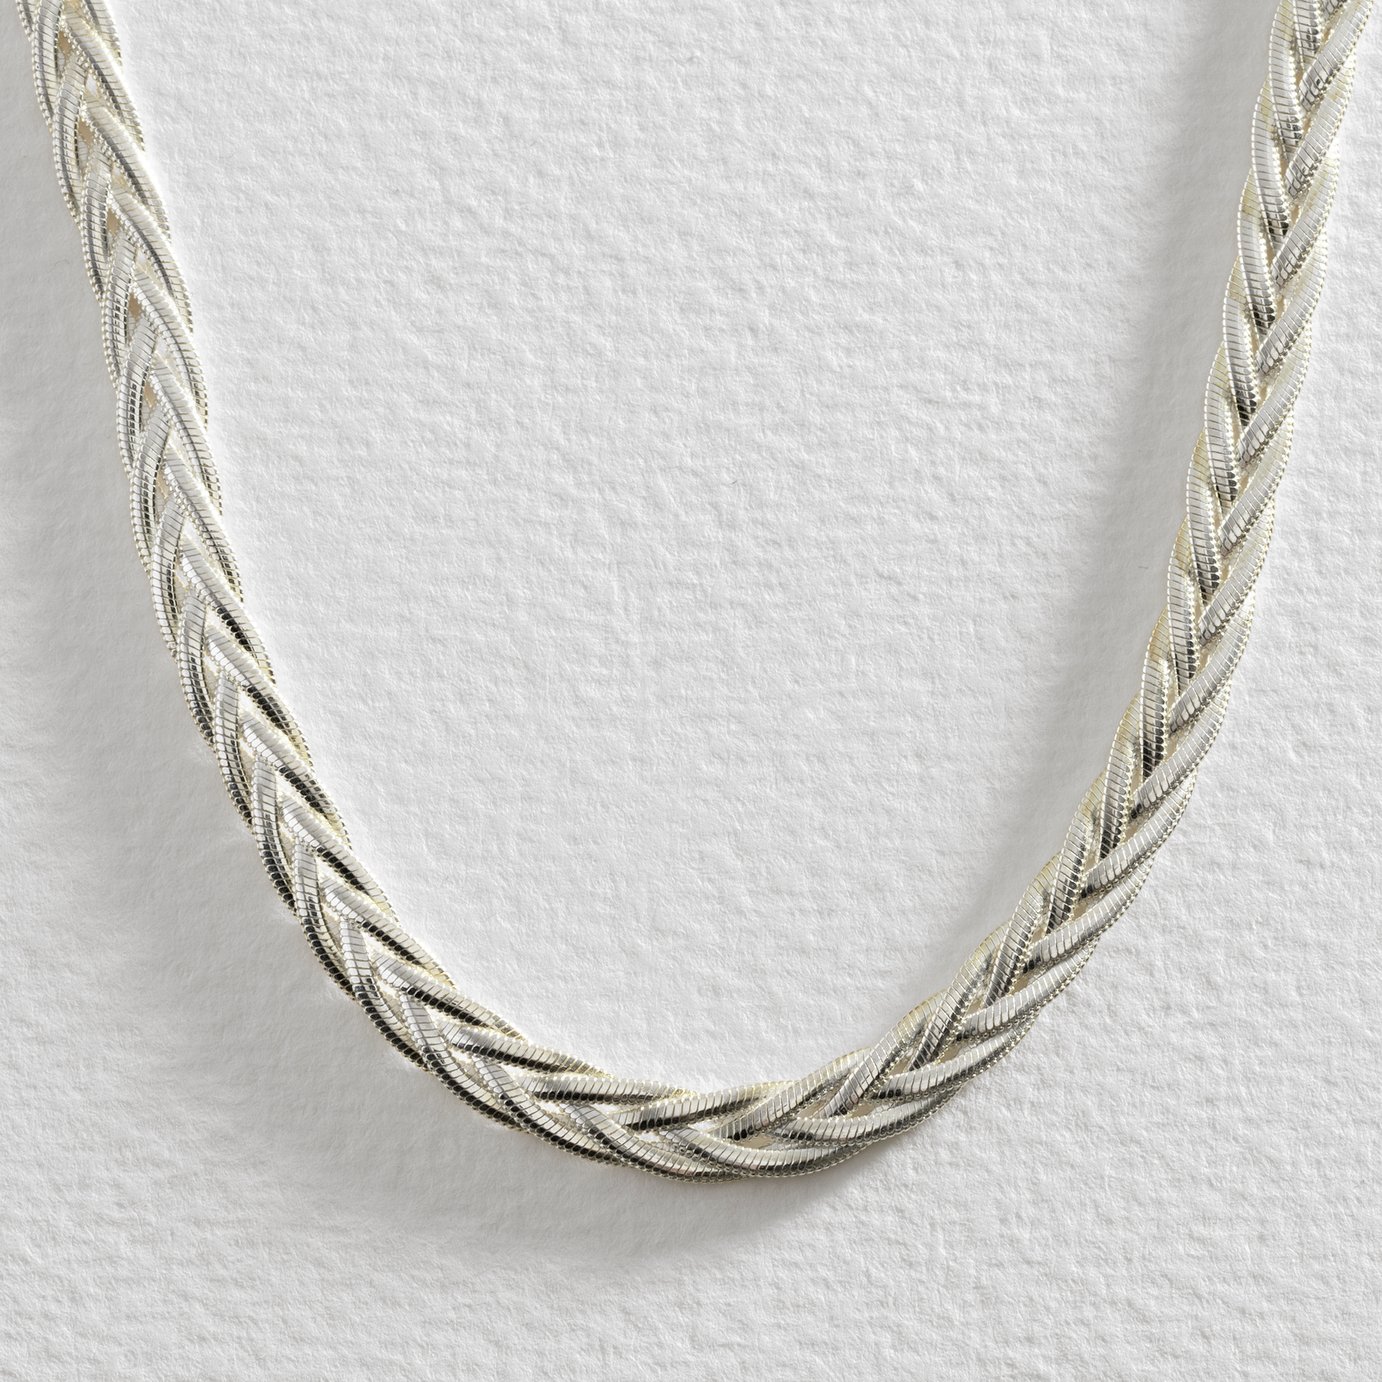 Revere Sterling Silver Oval Wheat Shape Snake Chain Necklace